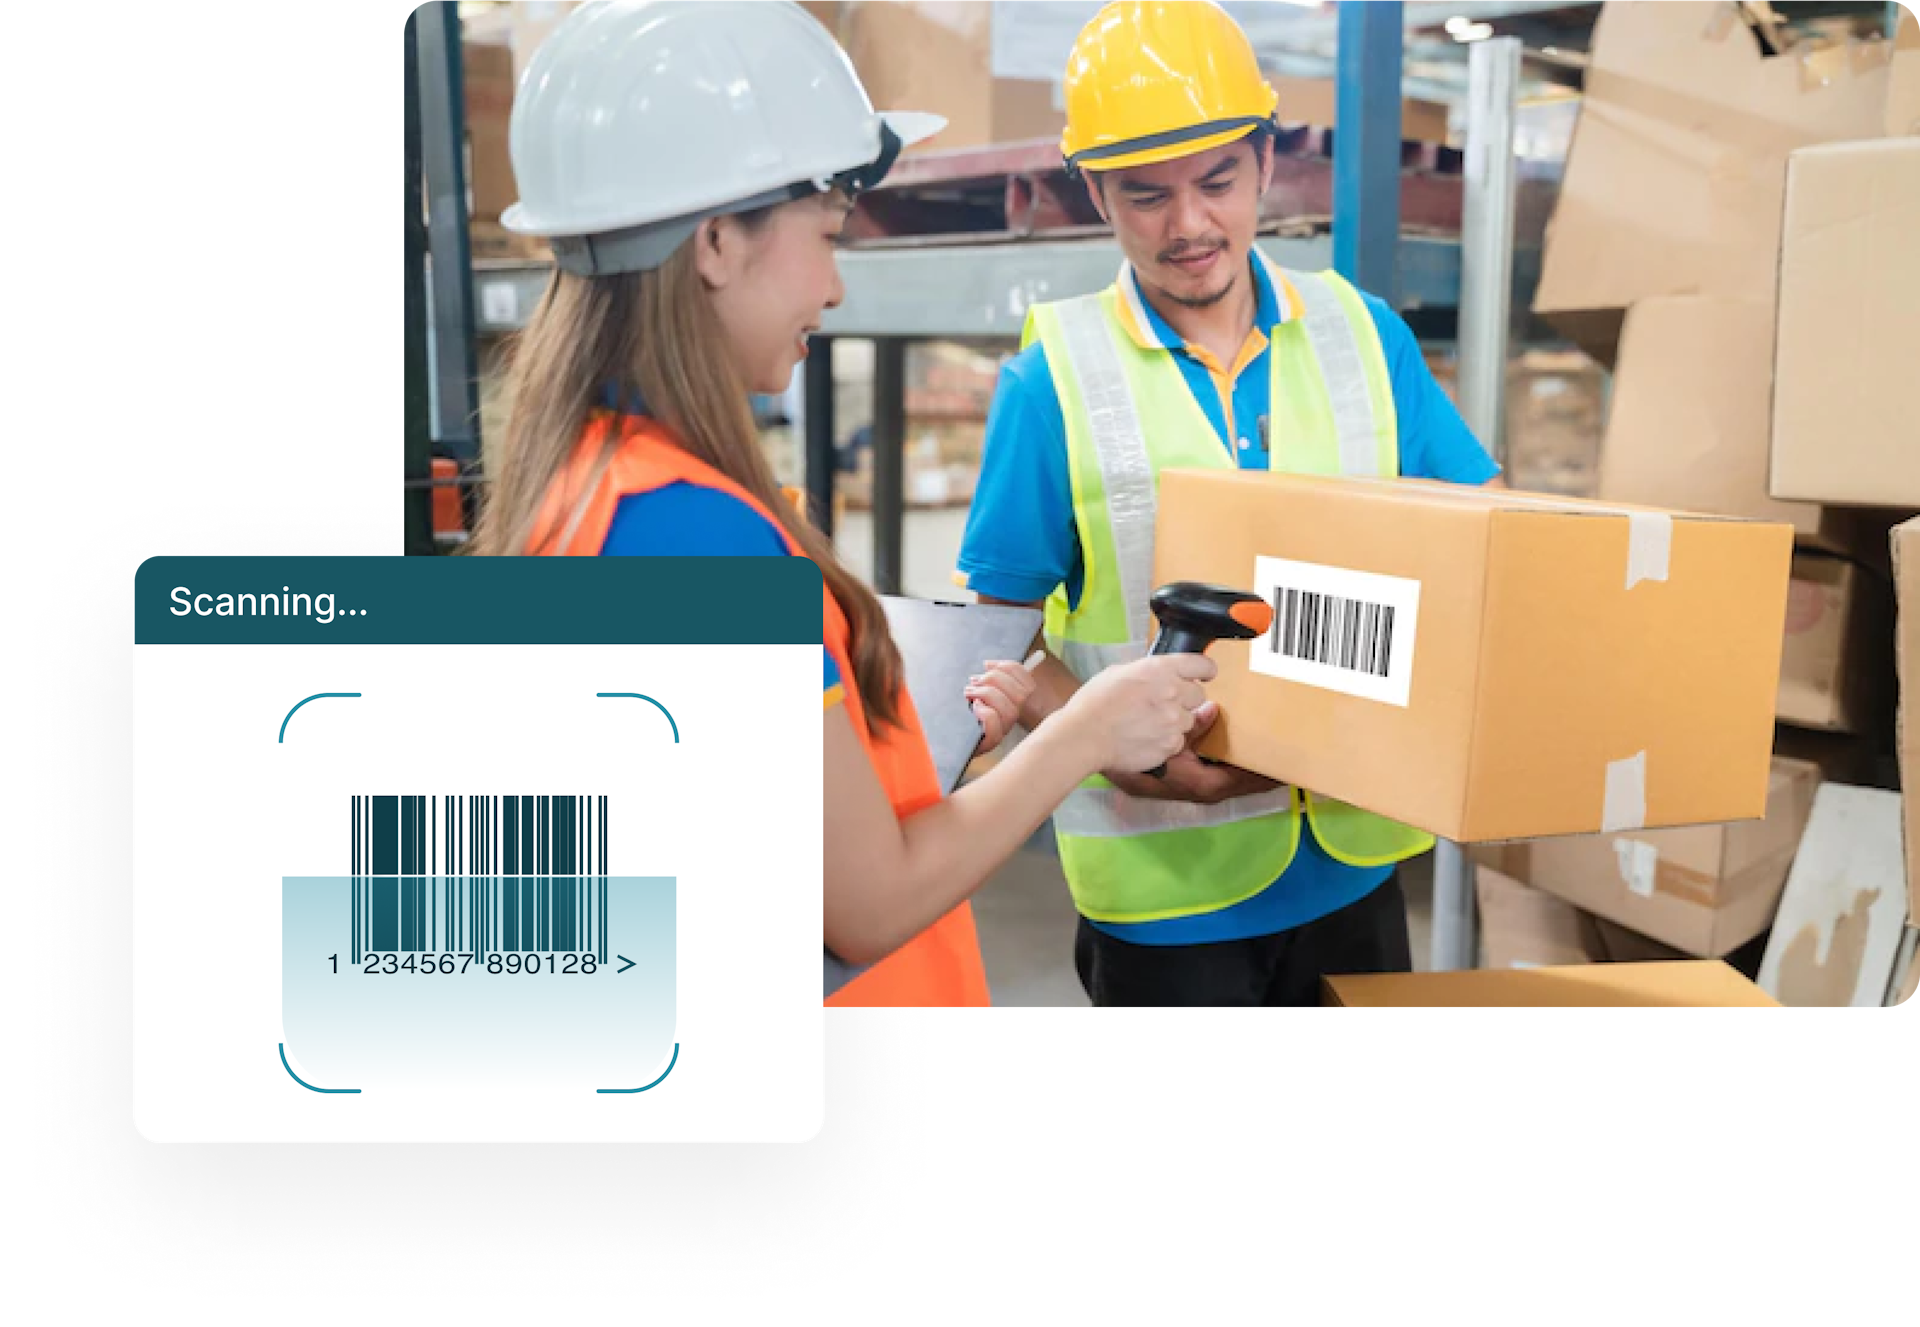 Workers scanning a barcode off of a box